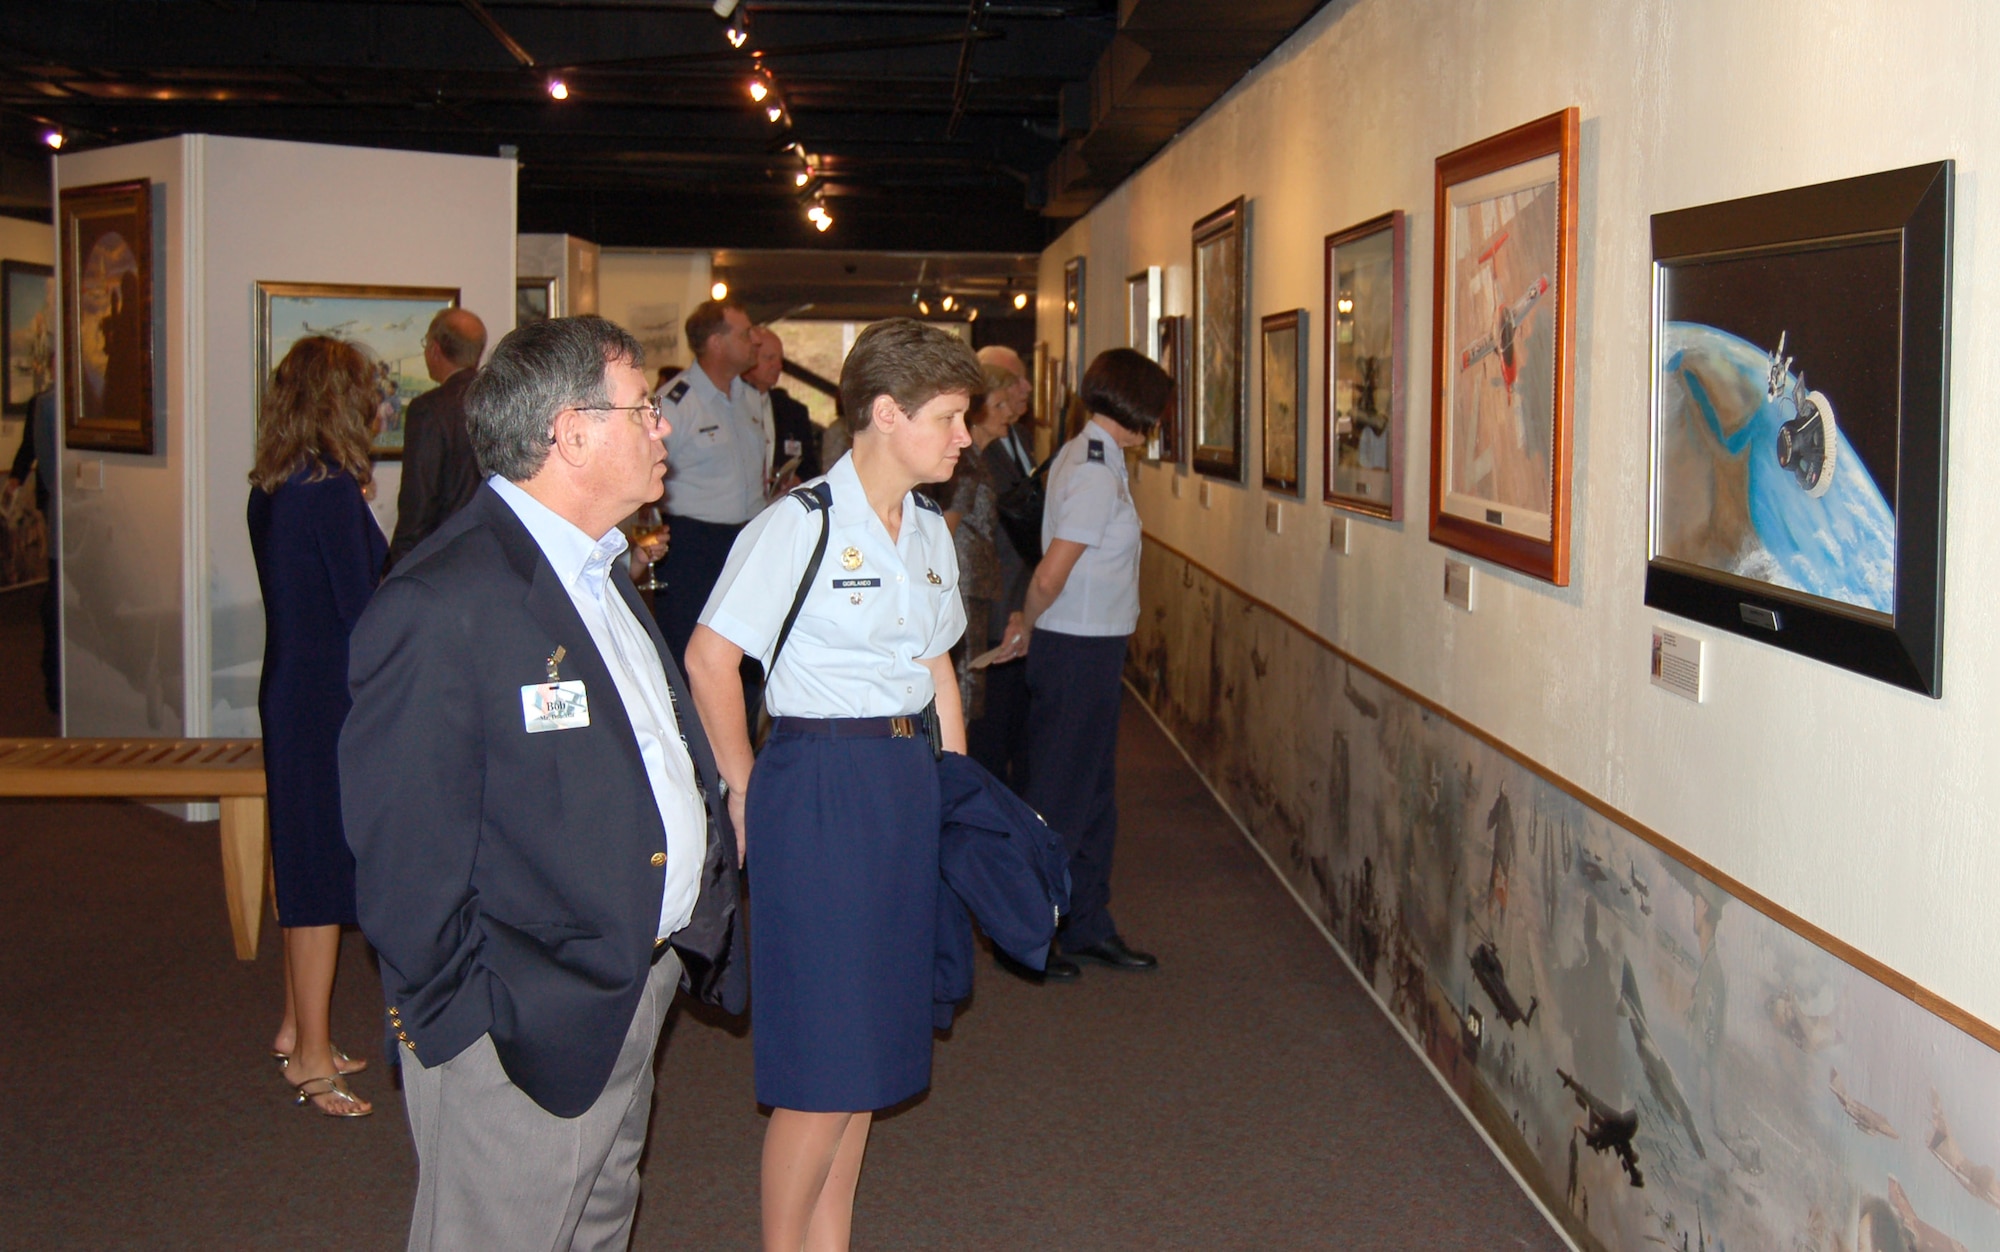 Local military and civil leaders look at an exhibit titled "Heritage to Horizons: U.S. Air Force History Through Art," which contains more than 50 art pieces from the Air Force Art Program and is on display at the University of Texas at San Antonio's Institute of Texan Cultures through Aug. 12. (U.S. Air Force photo/Staff Sgt. Shad Eidson) 
